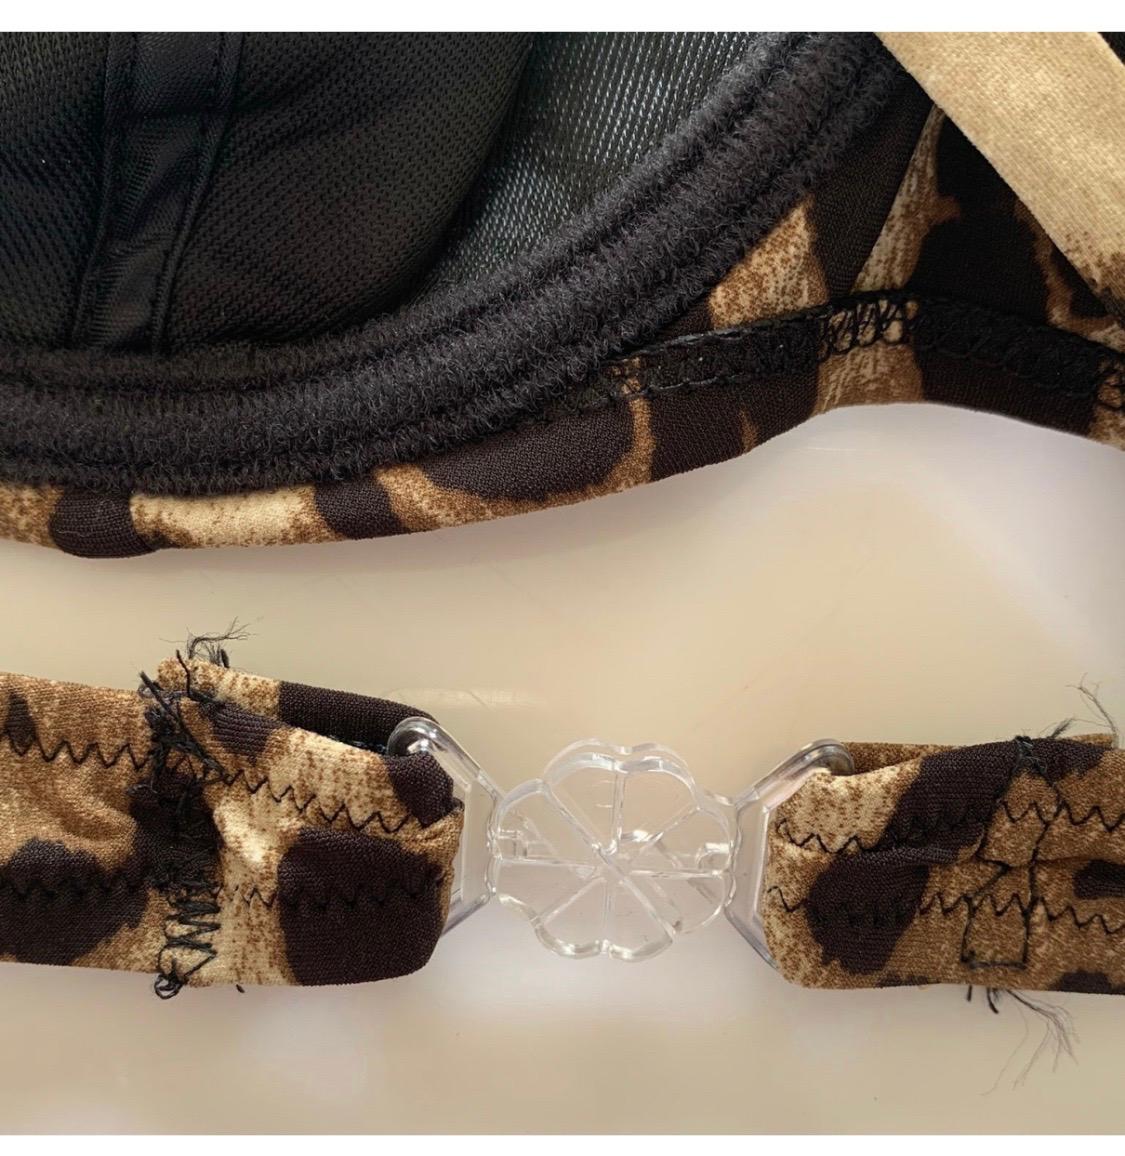 Dolce & Gabbana classic leopard

printed balconette bra swimwear set
Size 2IT UK8, S. stretch!

Top has replaced rear closure as the
original one was broken.

Otherwise new with tags!

Please check my other DG clothing &

accessories!
